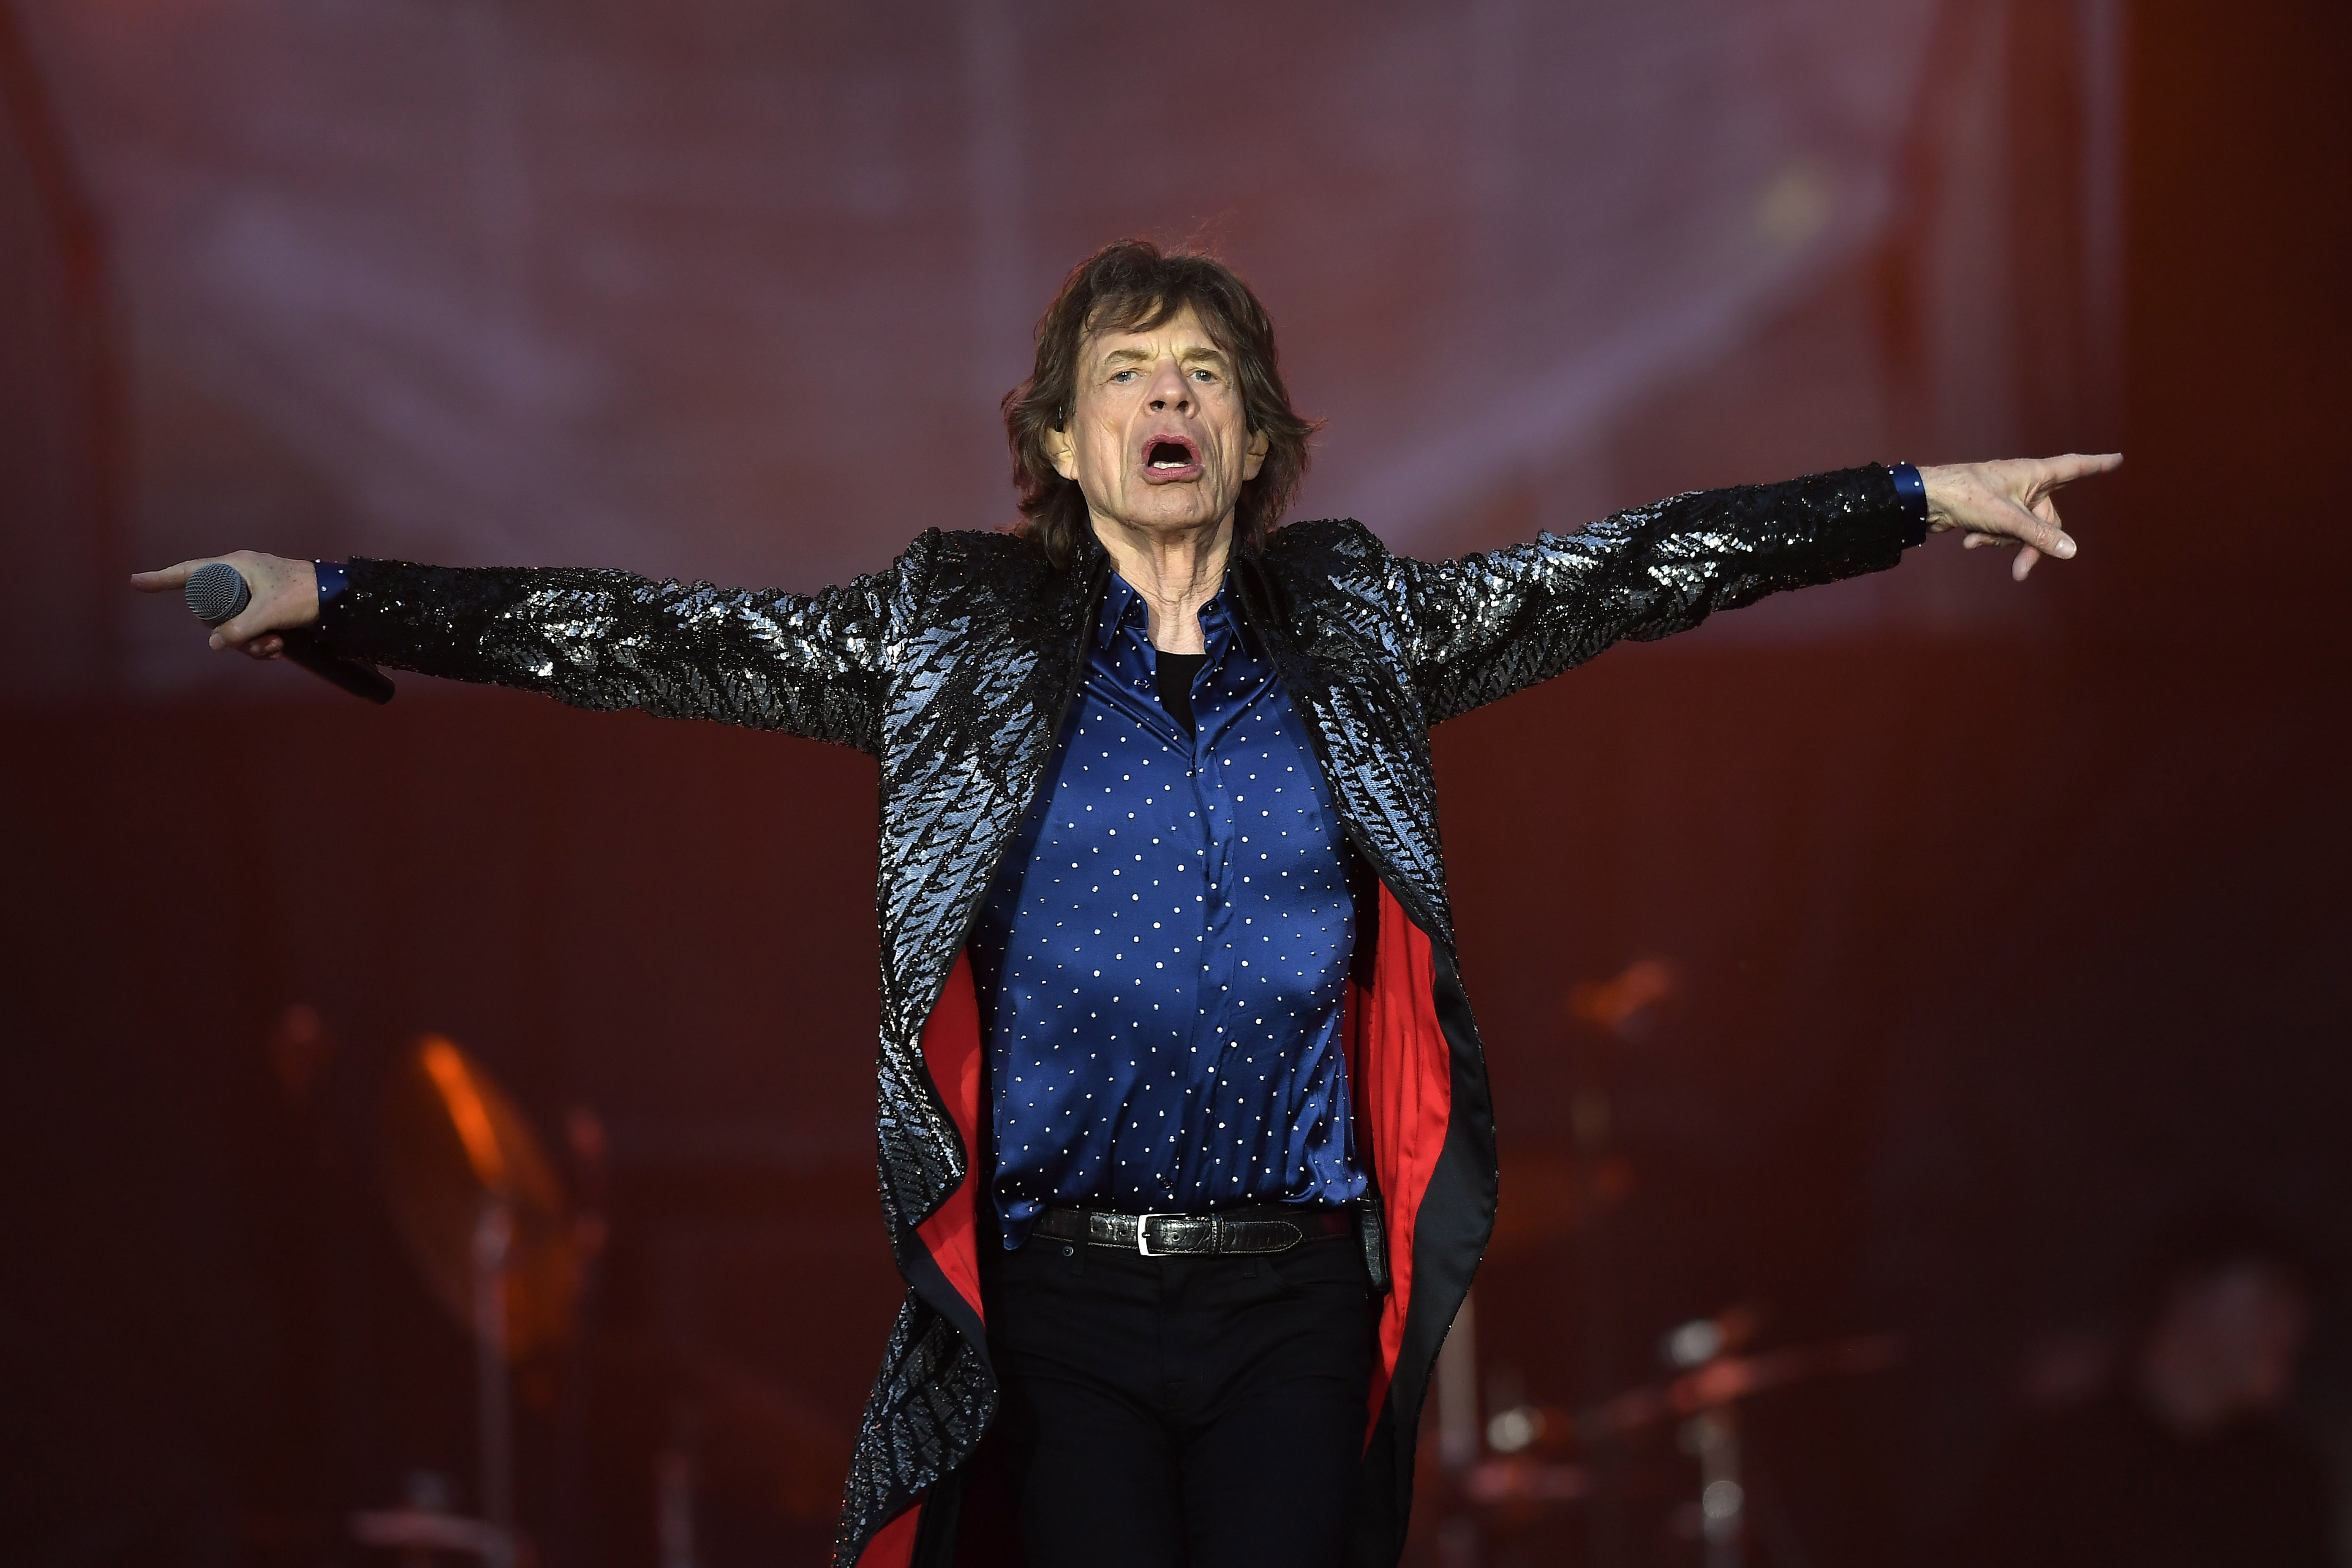 DUBLIN, IRELAND - MAY 17: Mick Jagger of The Rolling Stones performs live on stage on the opening n...